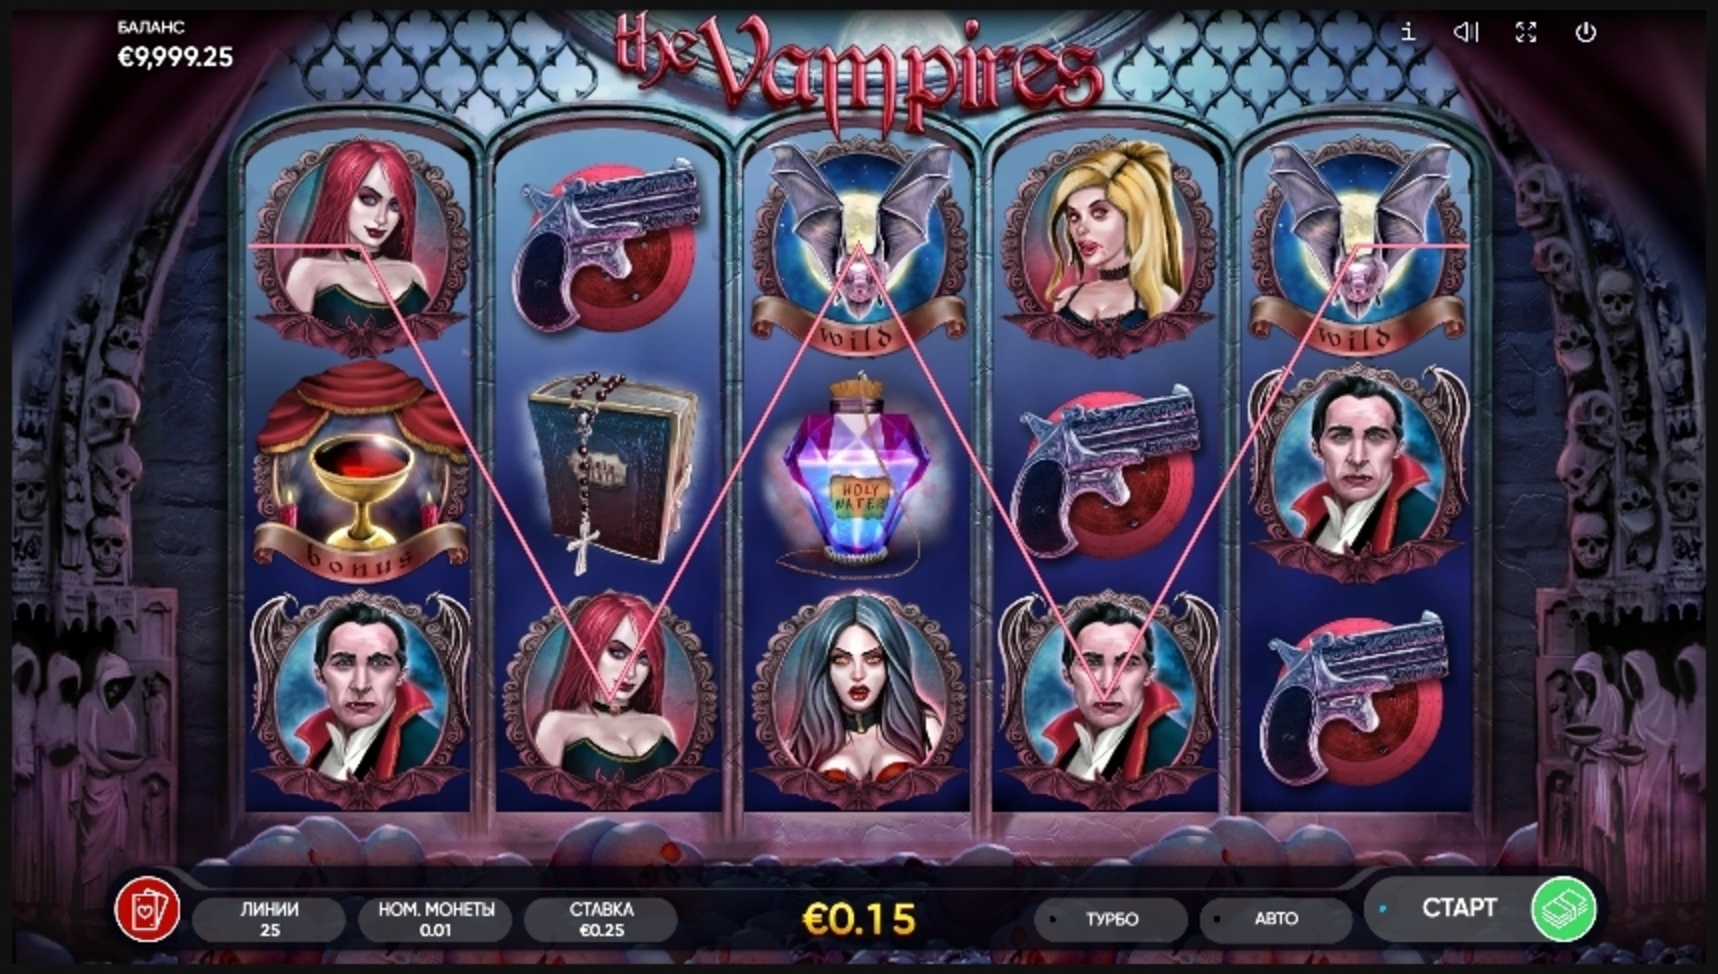 Win Money in The Vampires Free Slot Game by Endorphina